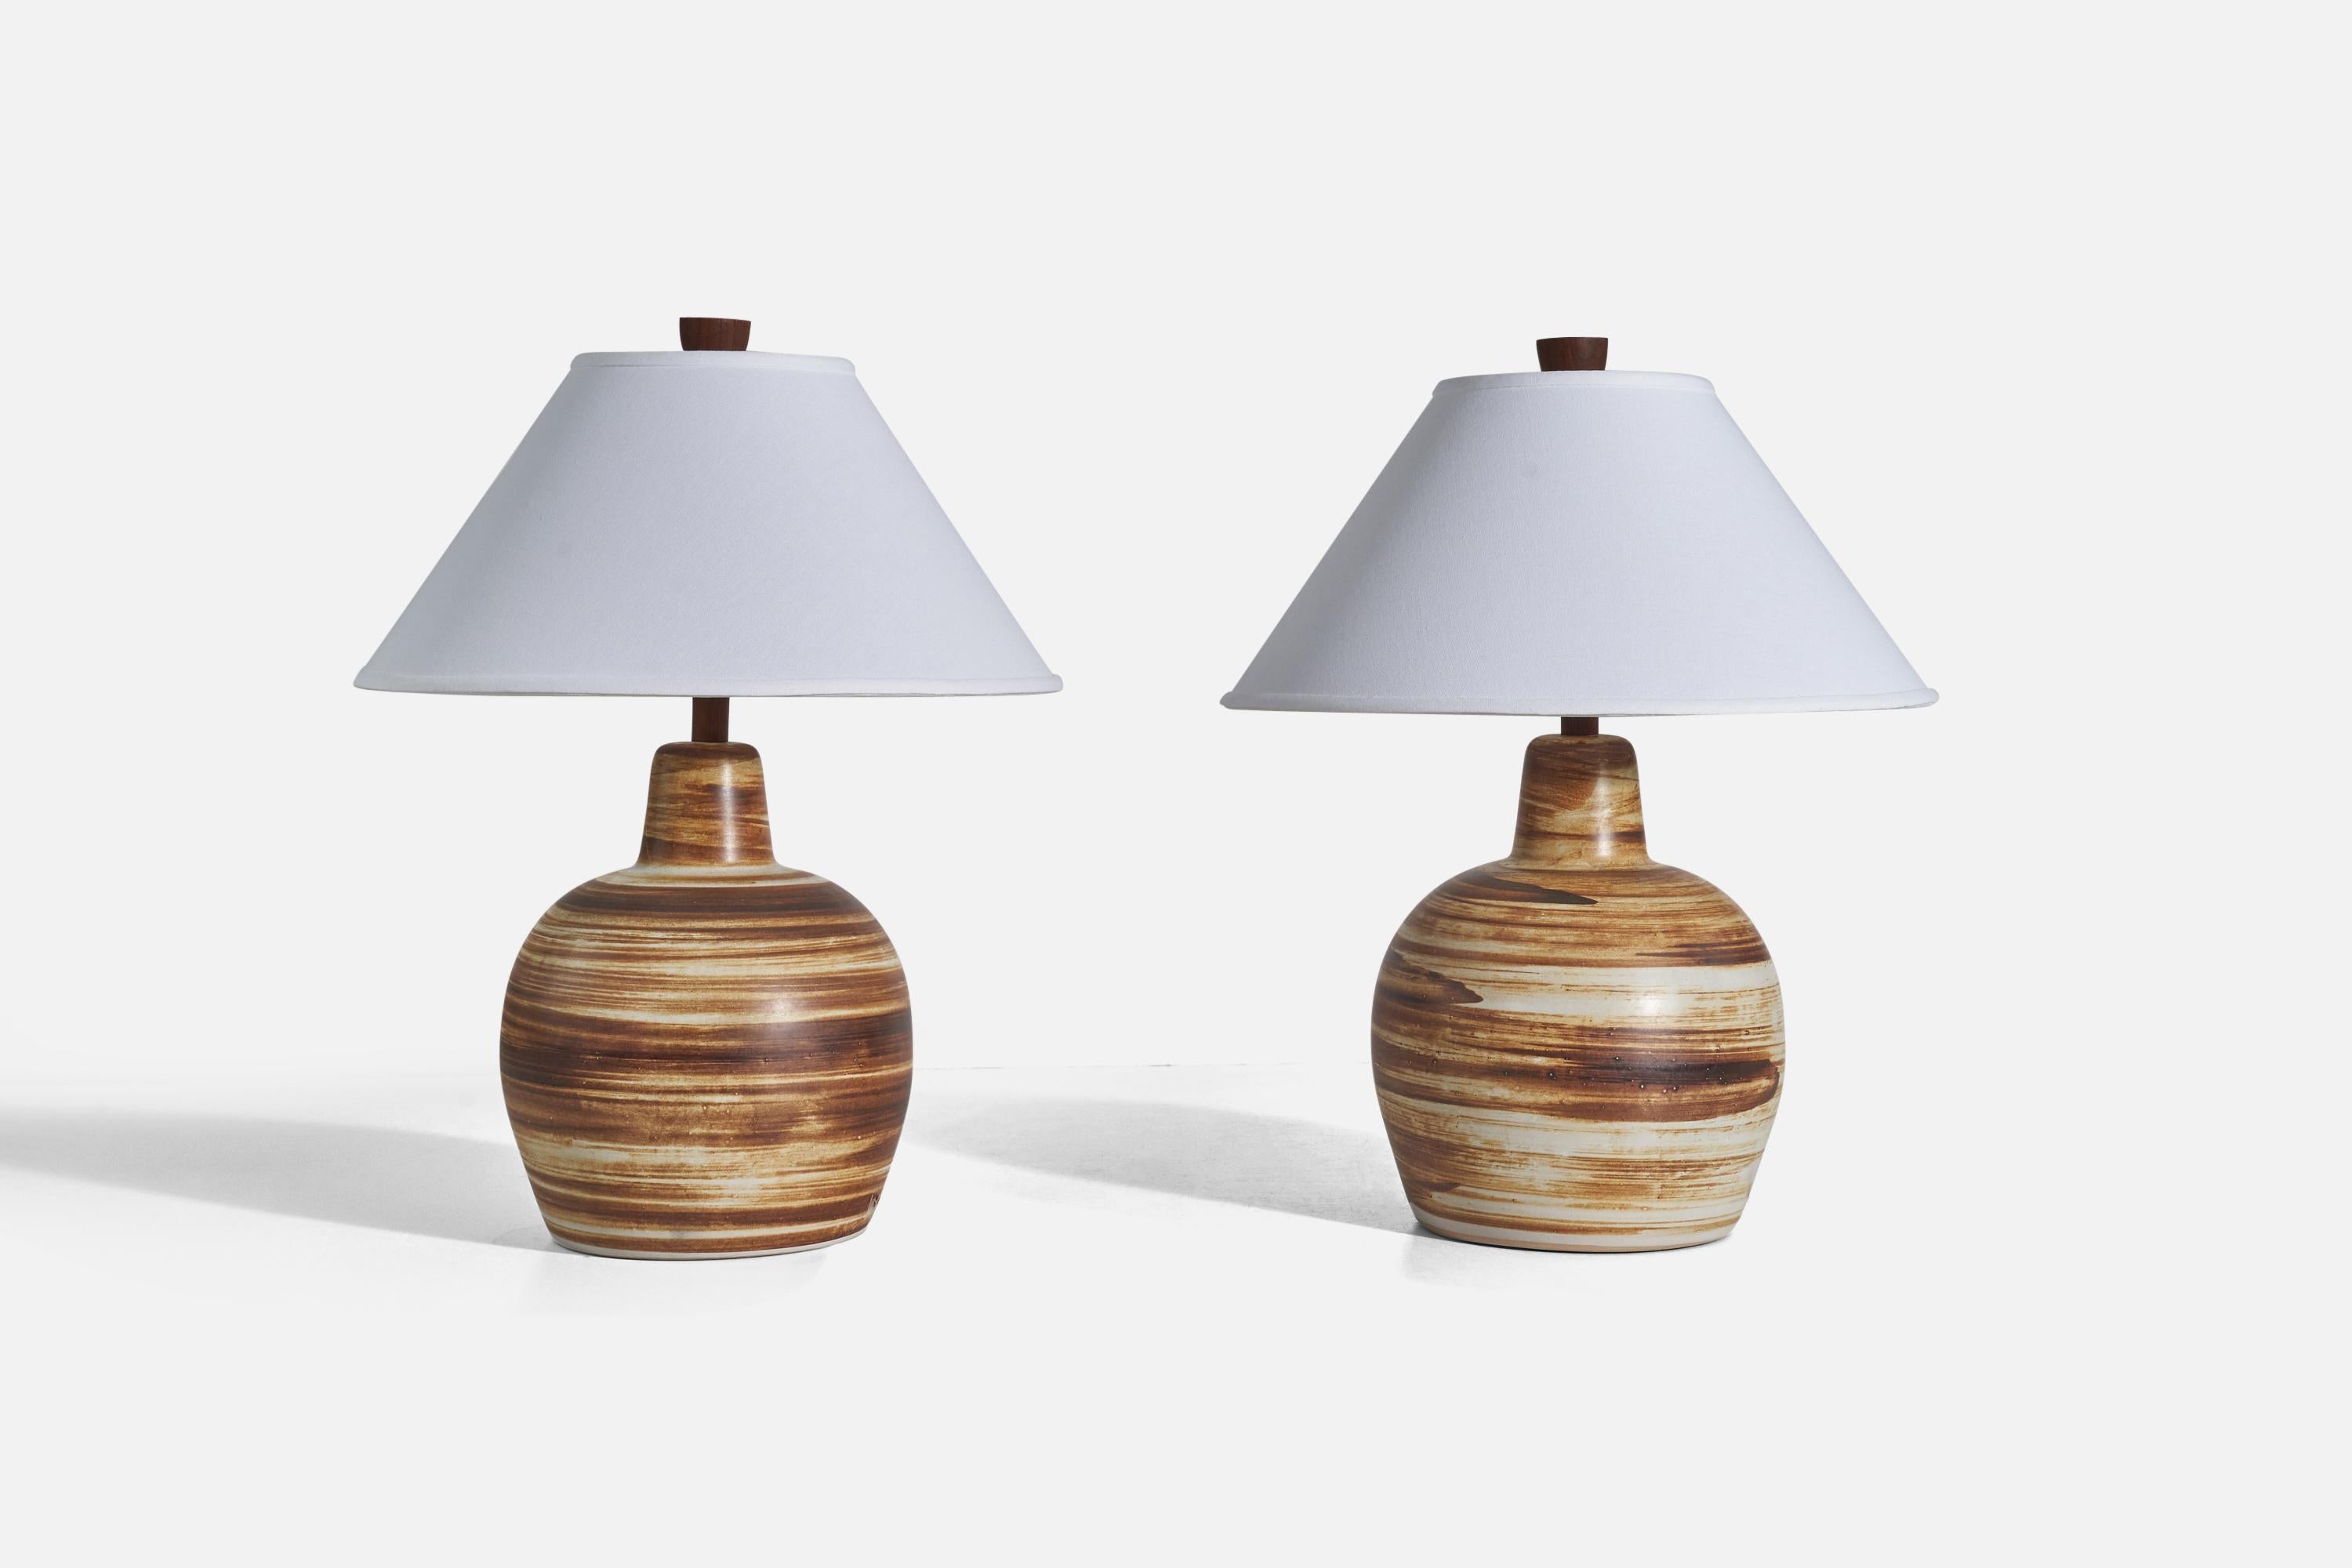 A pair of brown and white ceramic and walnut table lamps designed by Jane & Gordon Martz and produced by Marshall Studios, Indianapolis, 1950s.

Sold without Lampshade
Dimensions of Lamp (inches) : 15.56 x 9.5 x 9.5 (Height x Width x